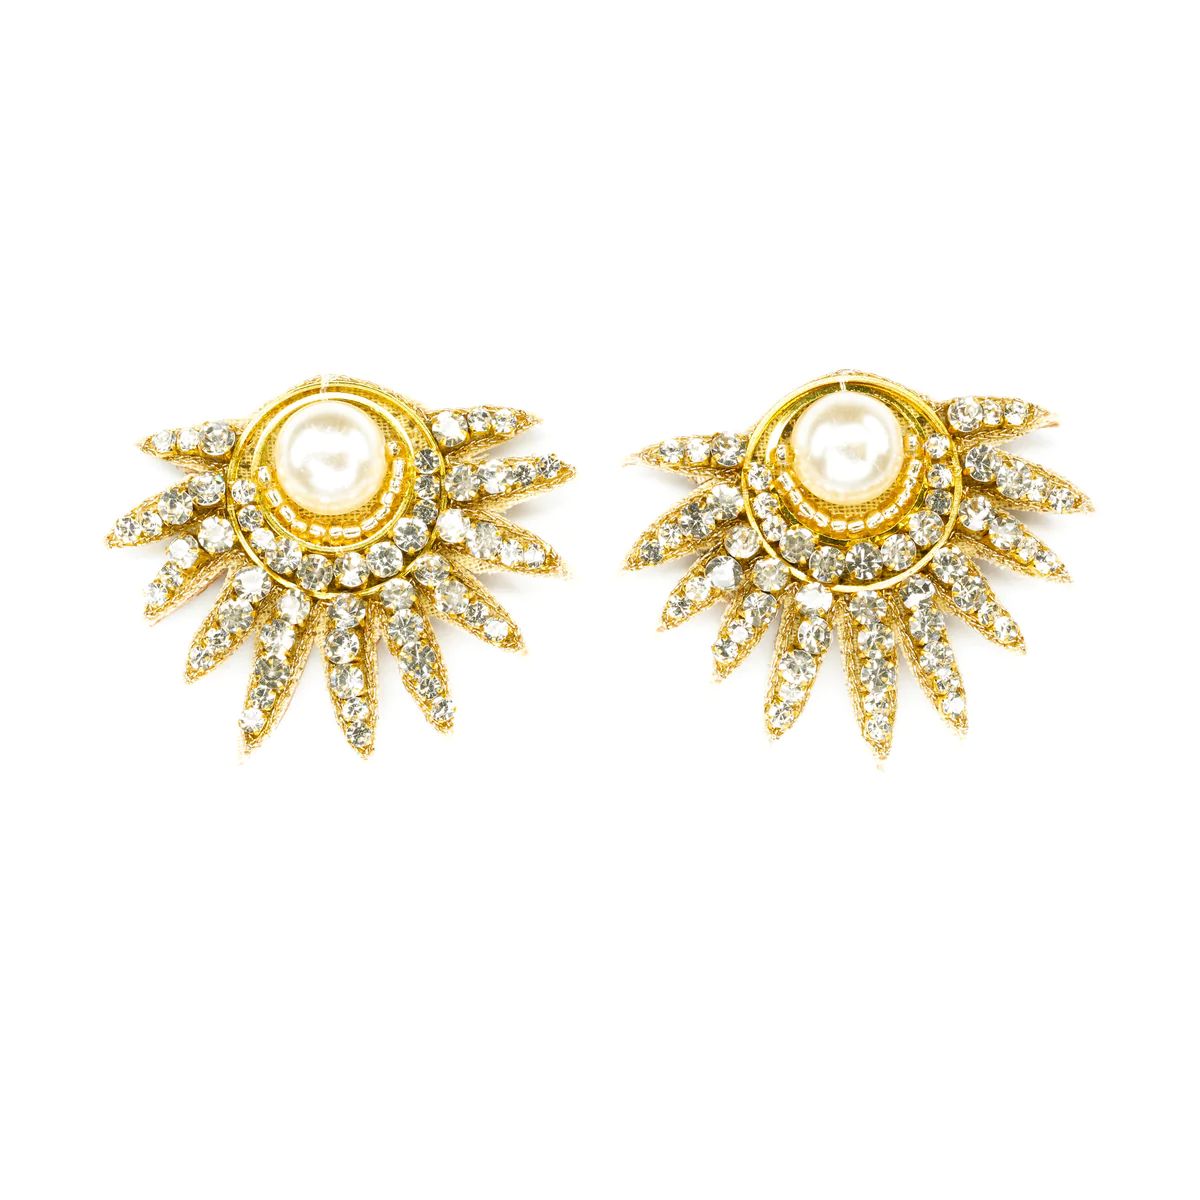 Carlyle Earrings | Beth Ladd Collections